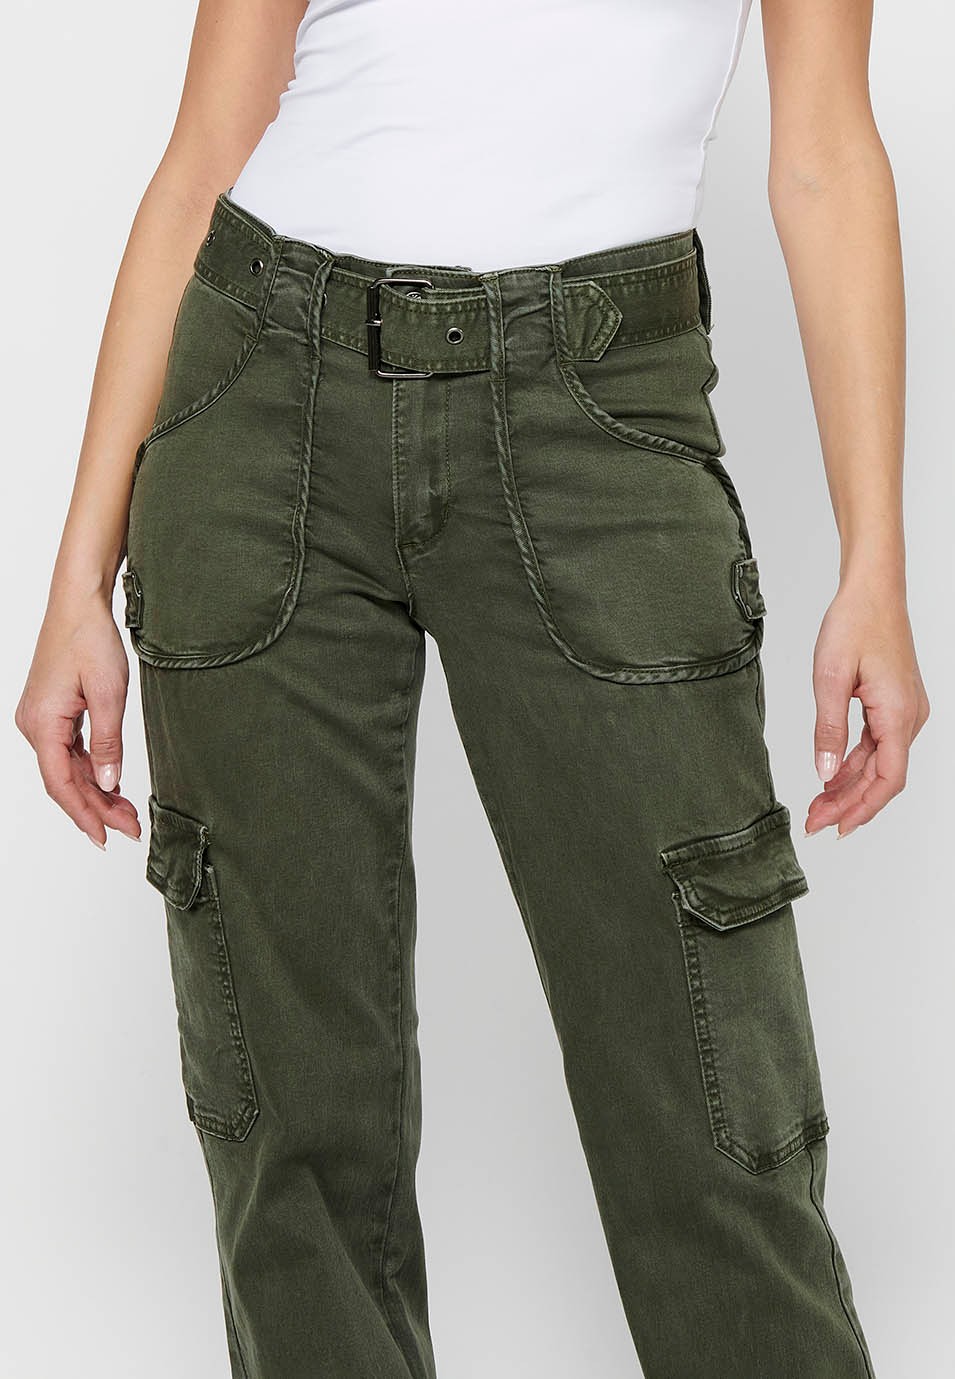 Long straight-cut pants with front zipper closure and button with patch pockets in Khaki Color for Women 5